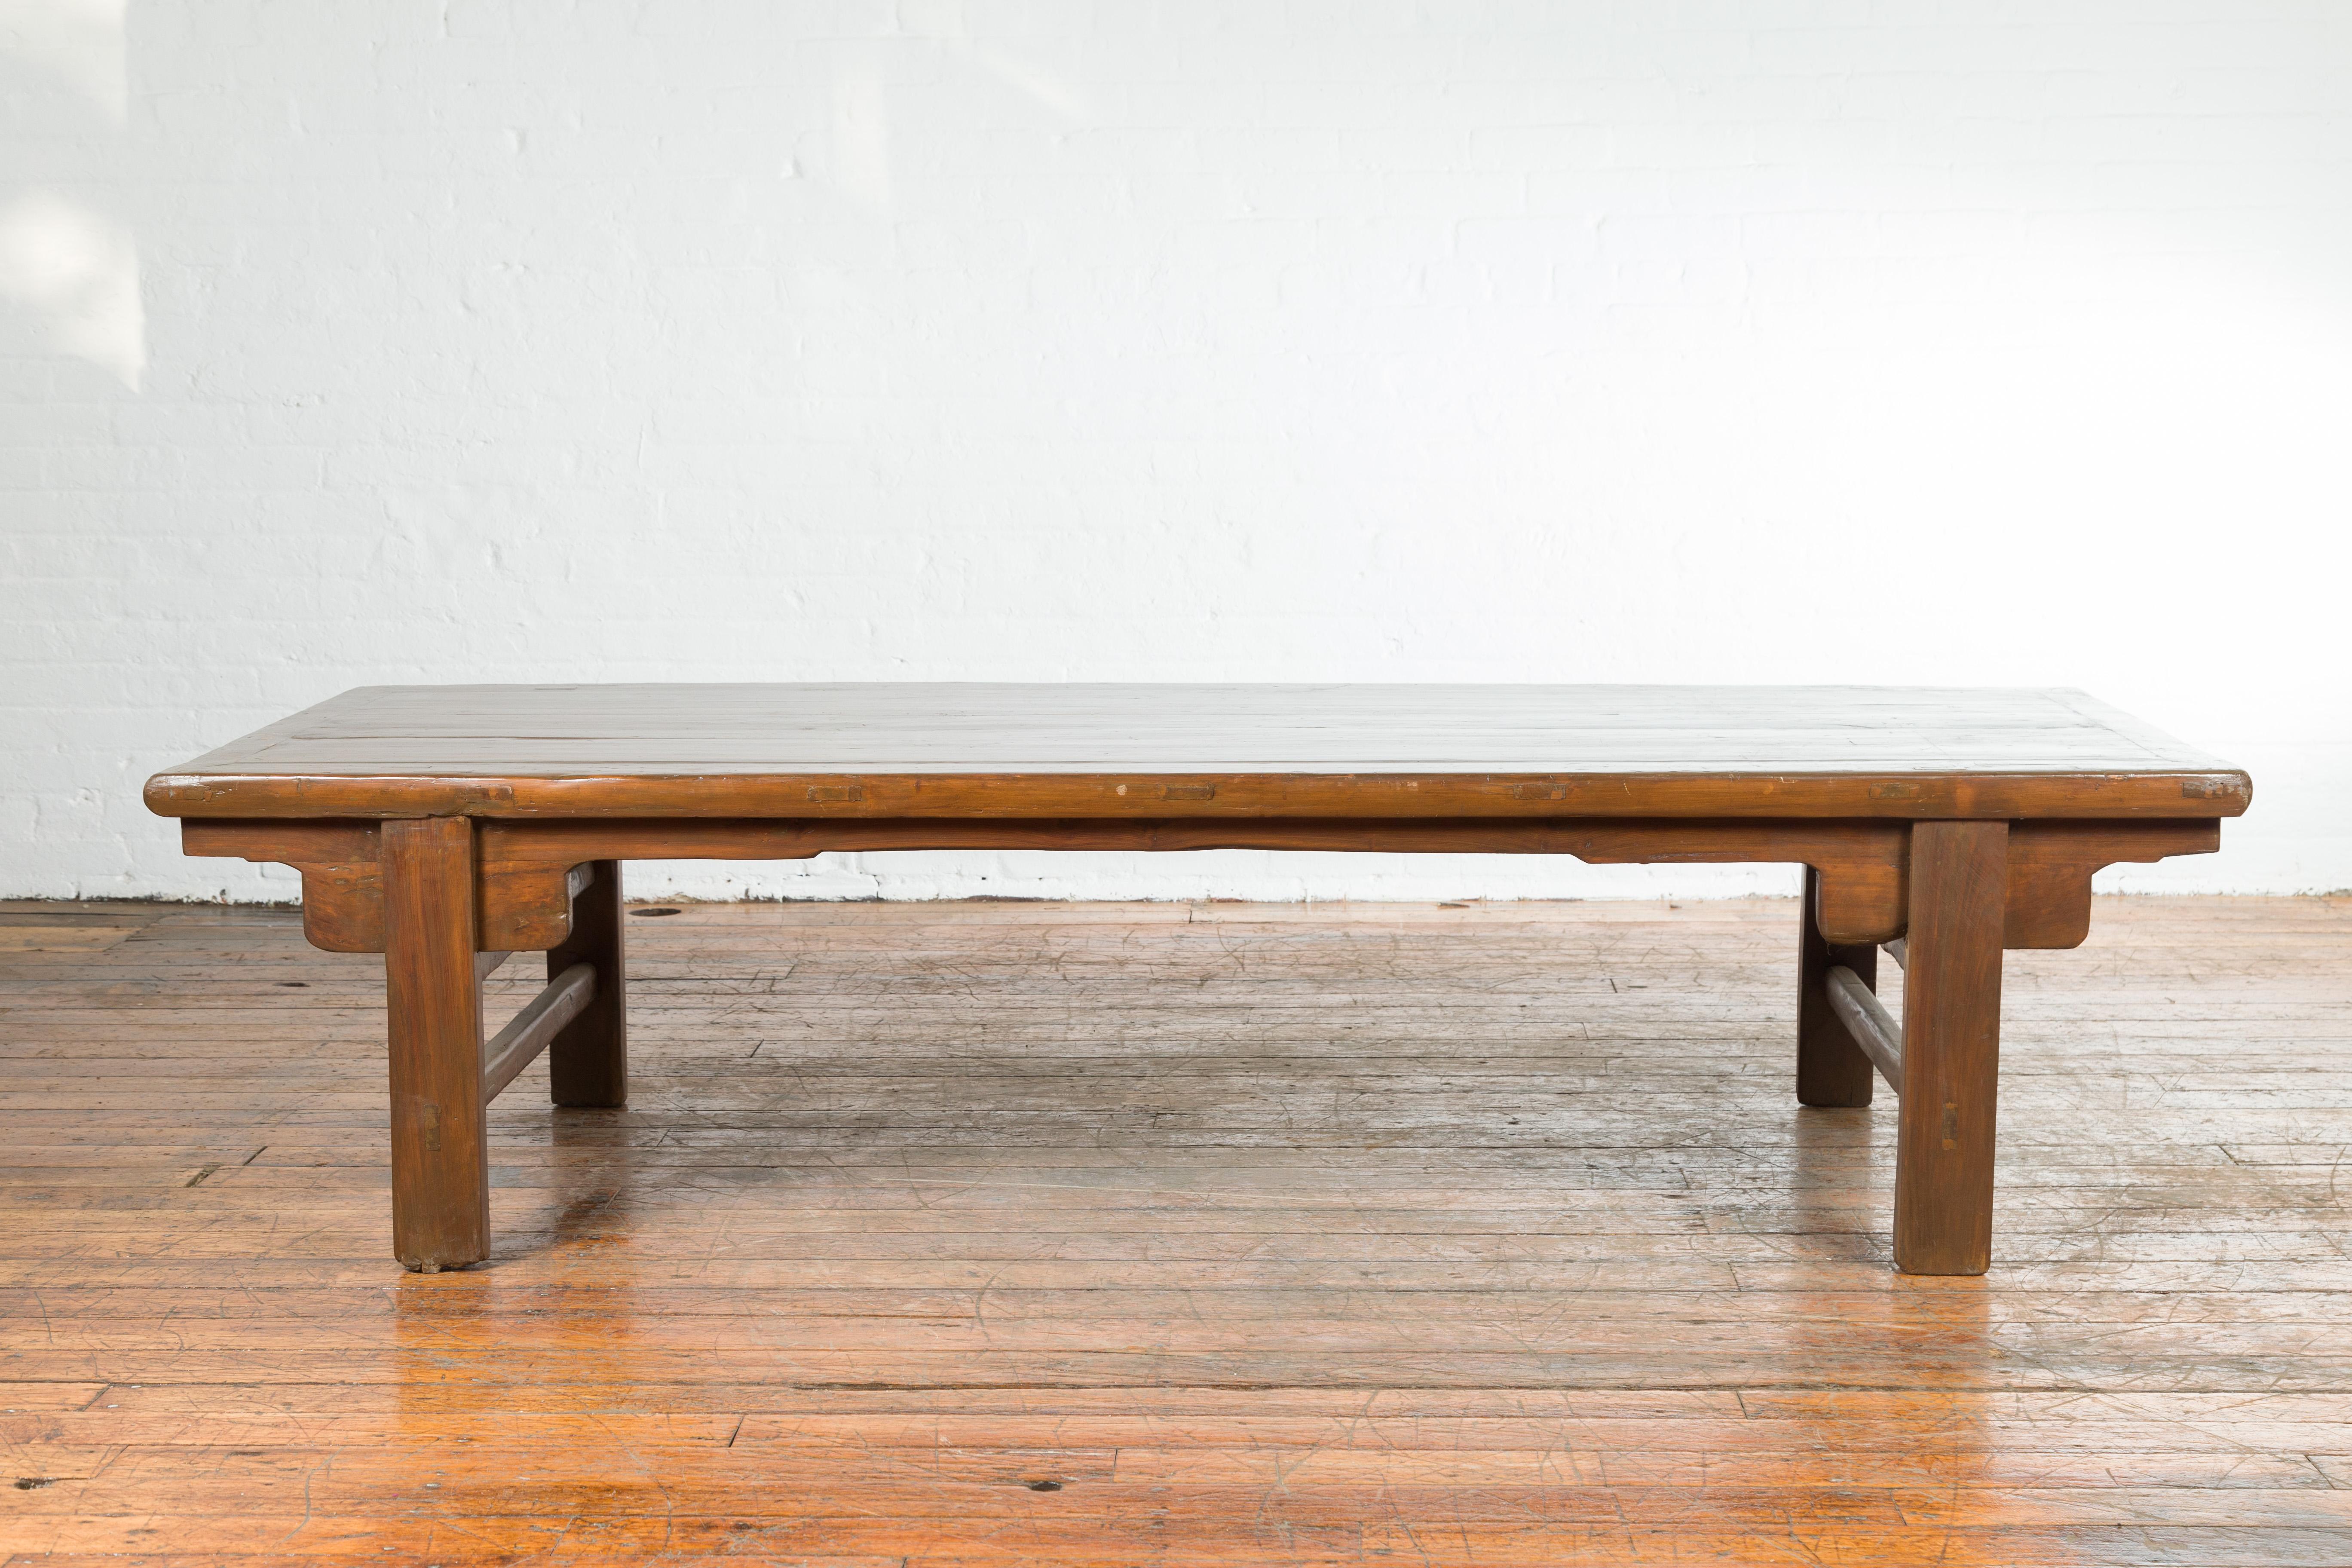 A Chinese Qing Dynasty period wide coffee table from the 19th century, with carved spandrels and side stretchers. Created in China during the Qing Dynasty period, this coffee table features a wide rectangular planked top sitting above four straight